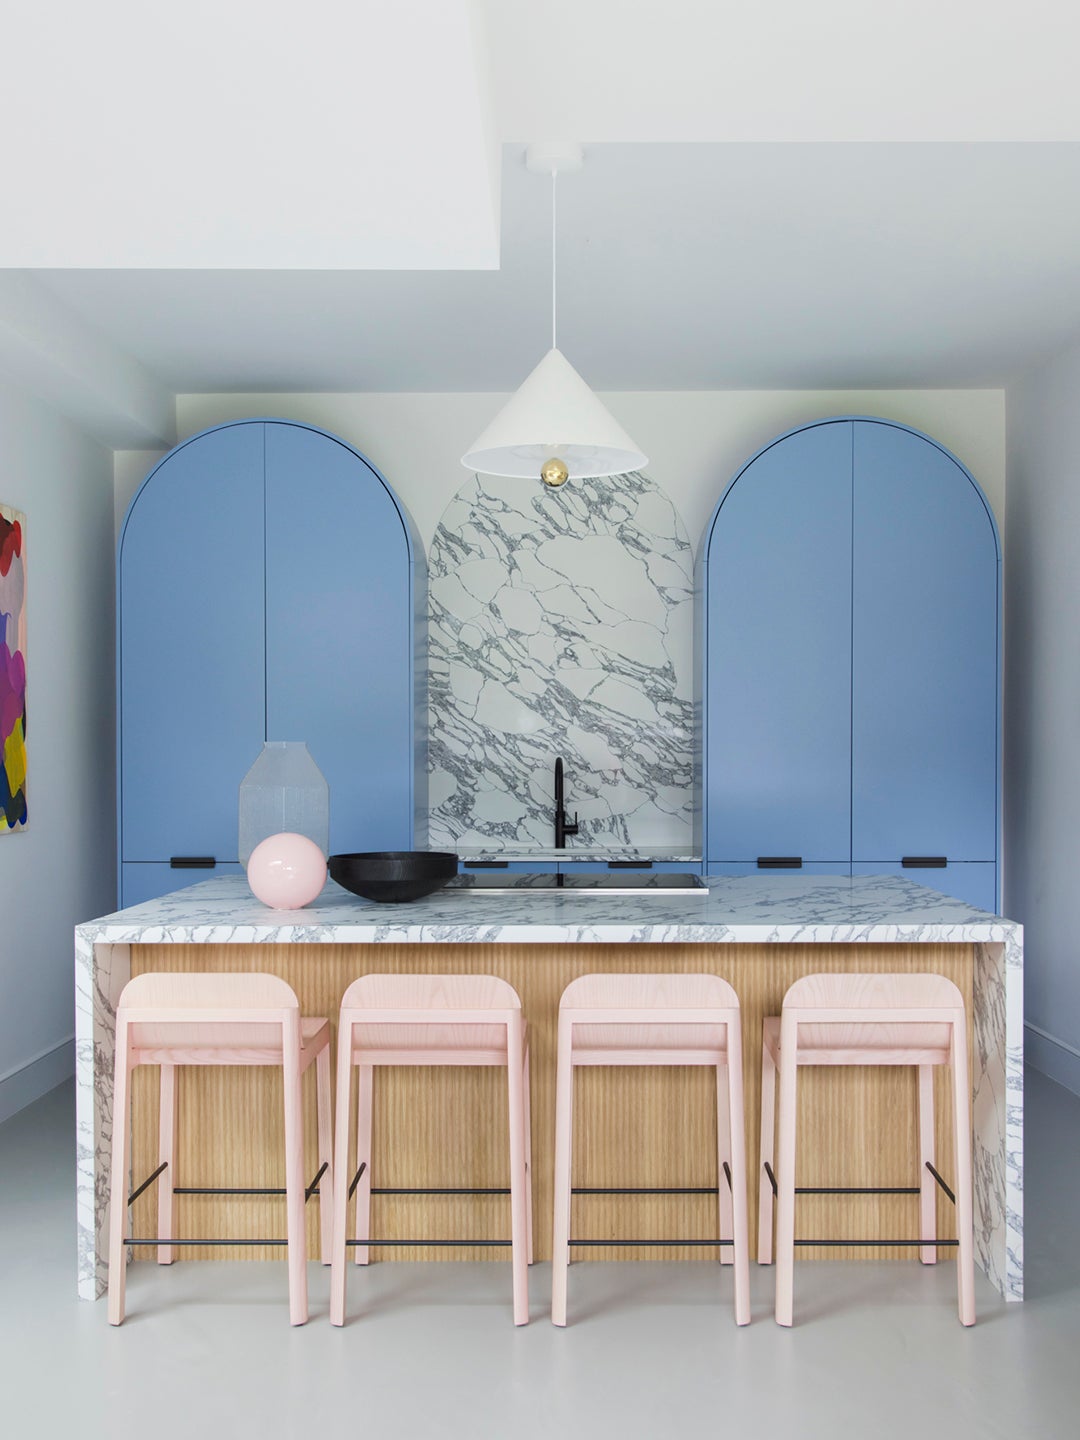 Kitchen with arched blue cabinets, marble counter, and pink stools.